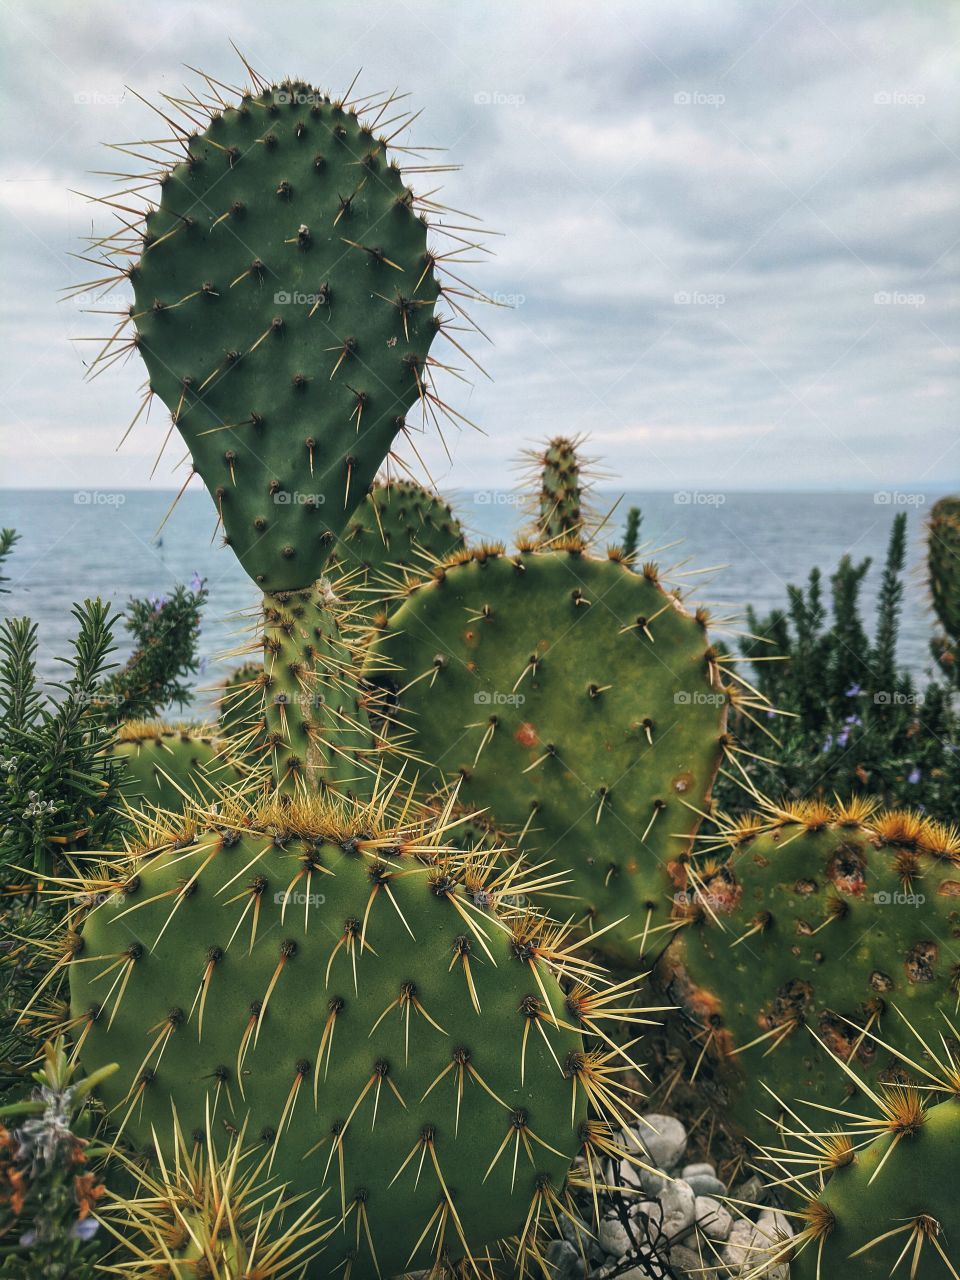 Background of wild green cactus at the adriatic seaside in autumn.